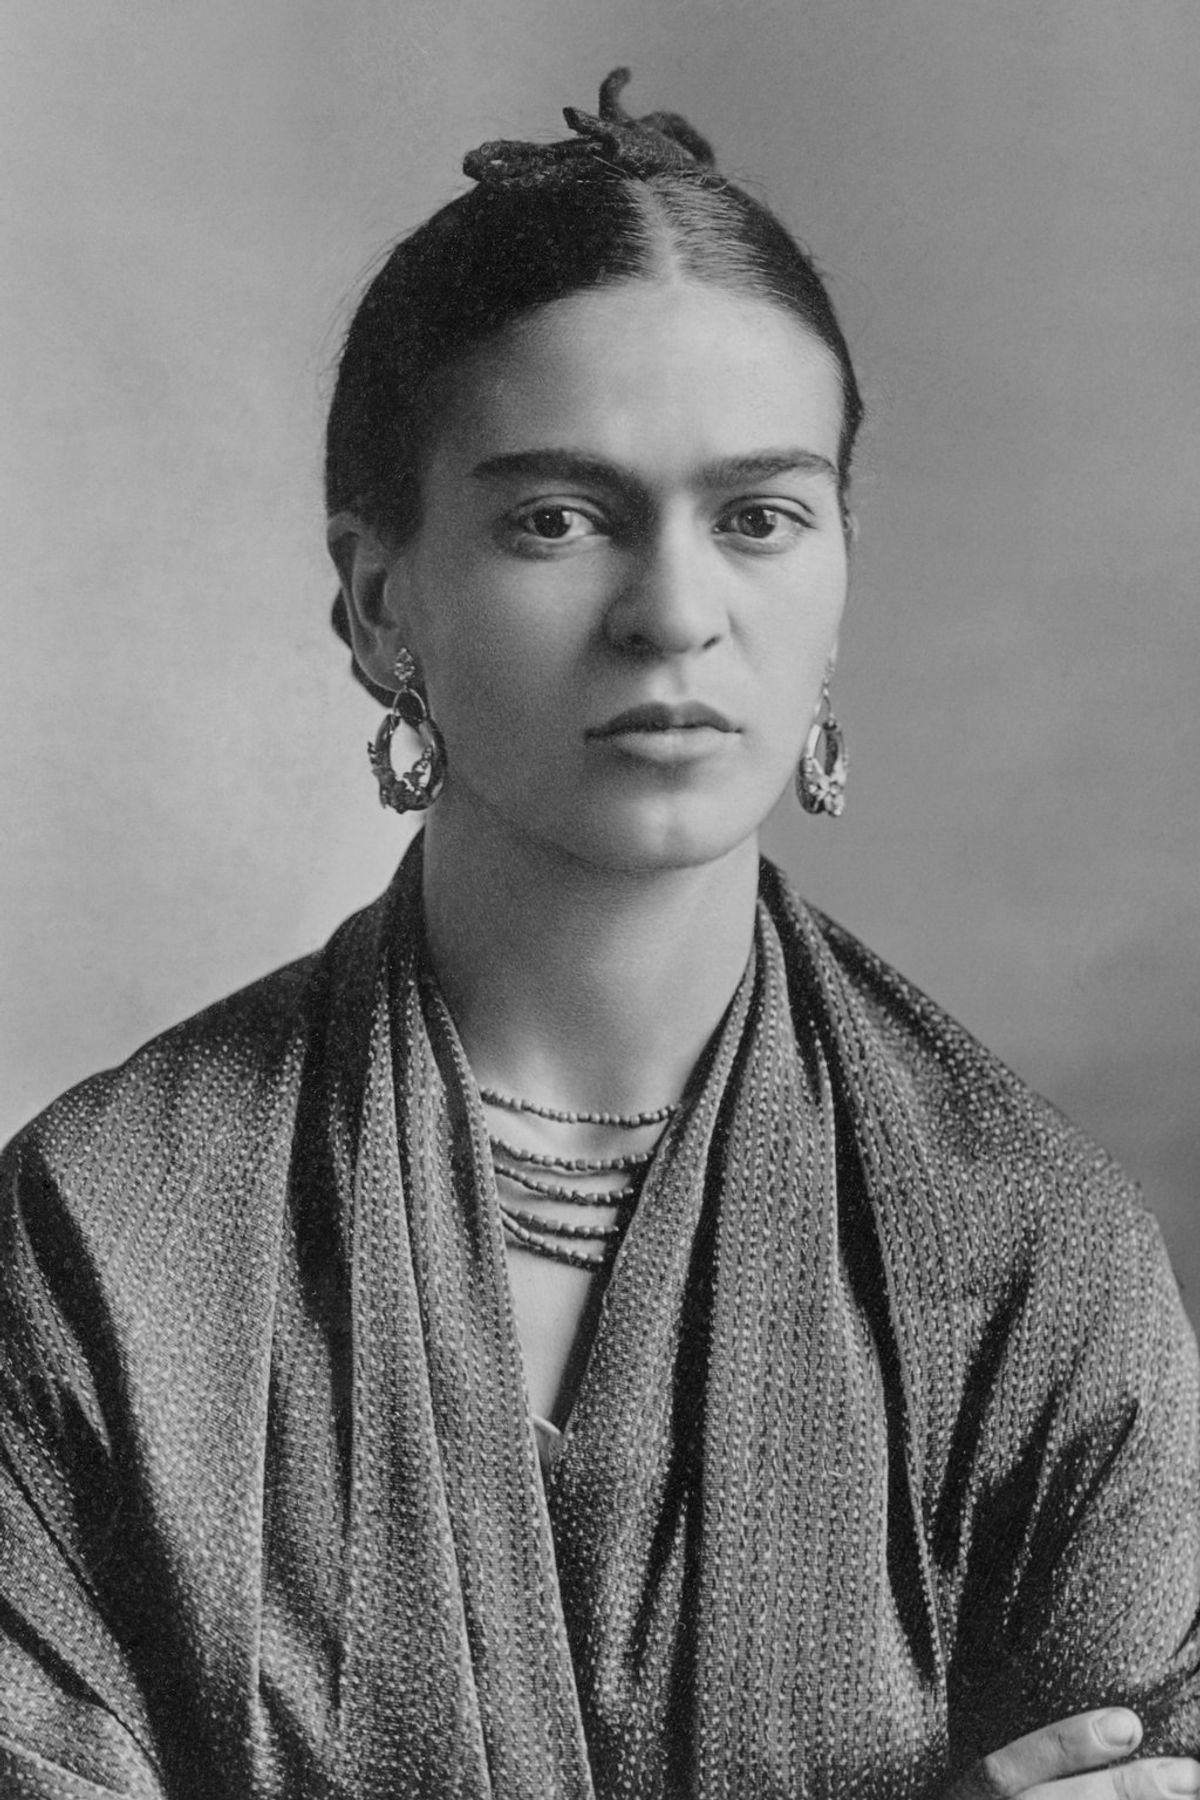 Portrait of Frida Kahlo by Guillermo Kahlo via Wikimedia Commons